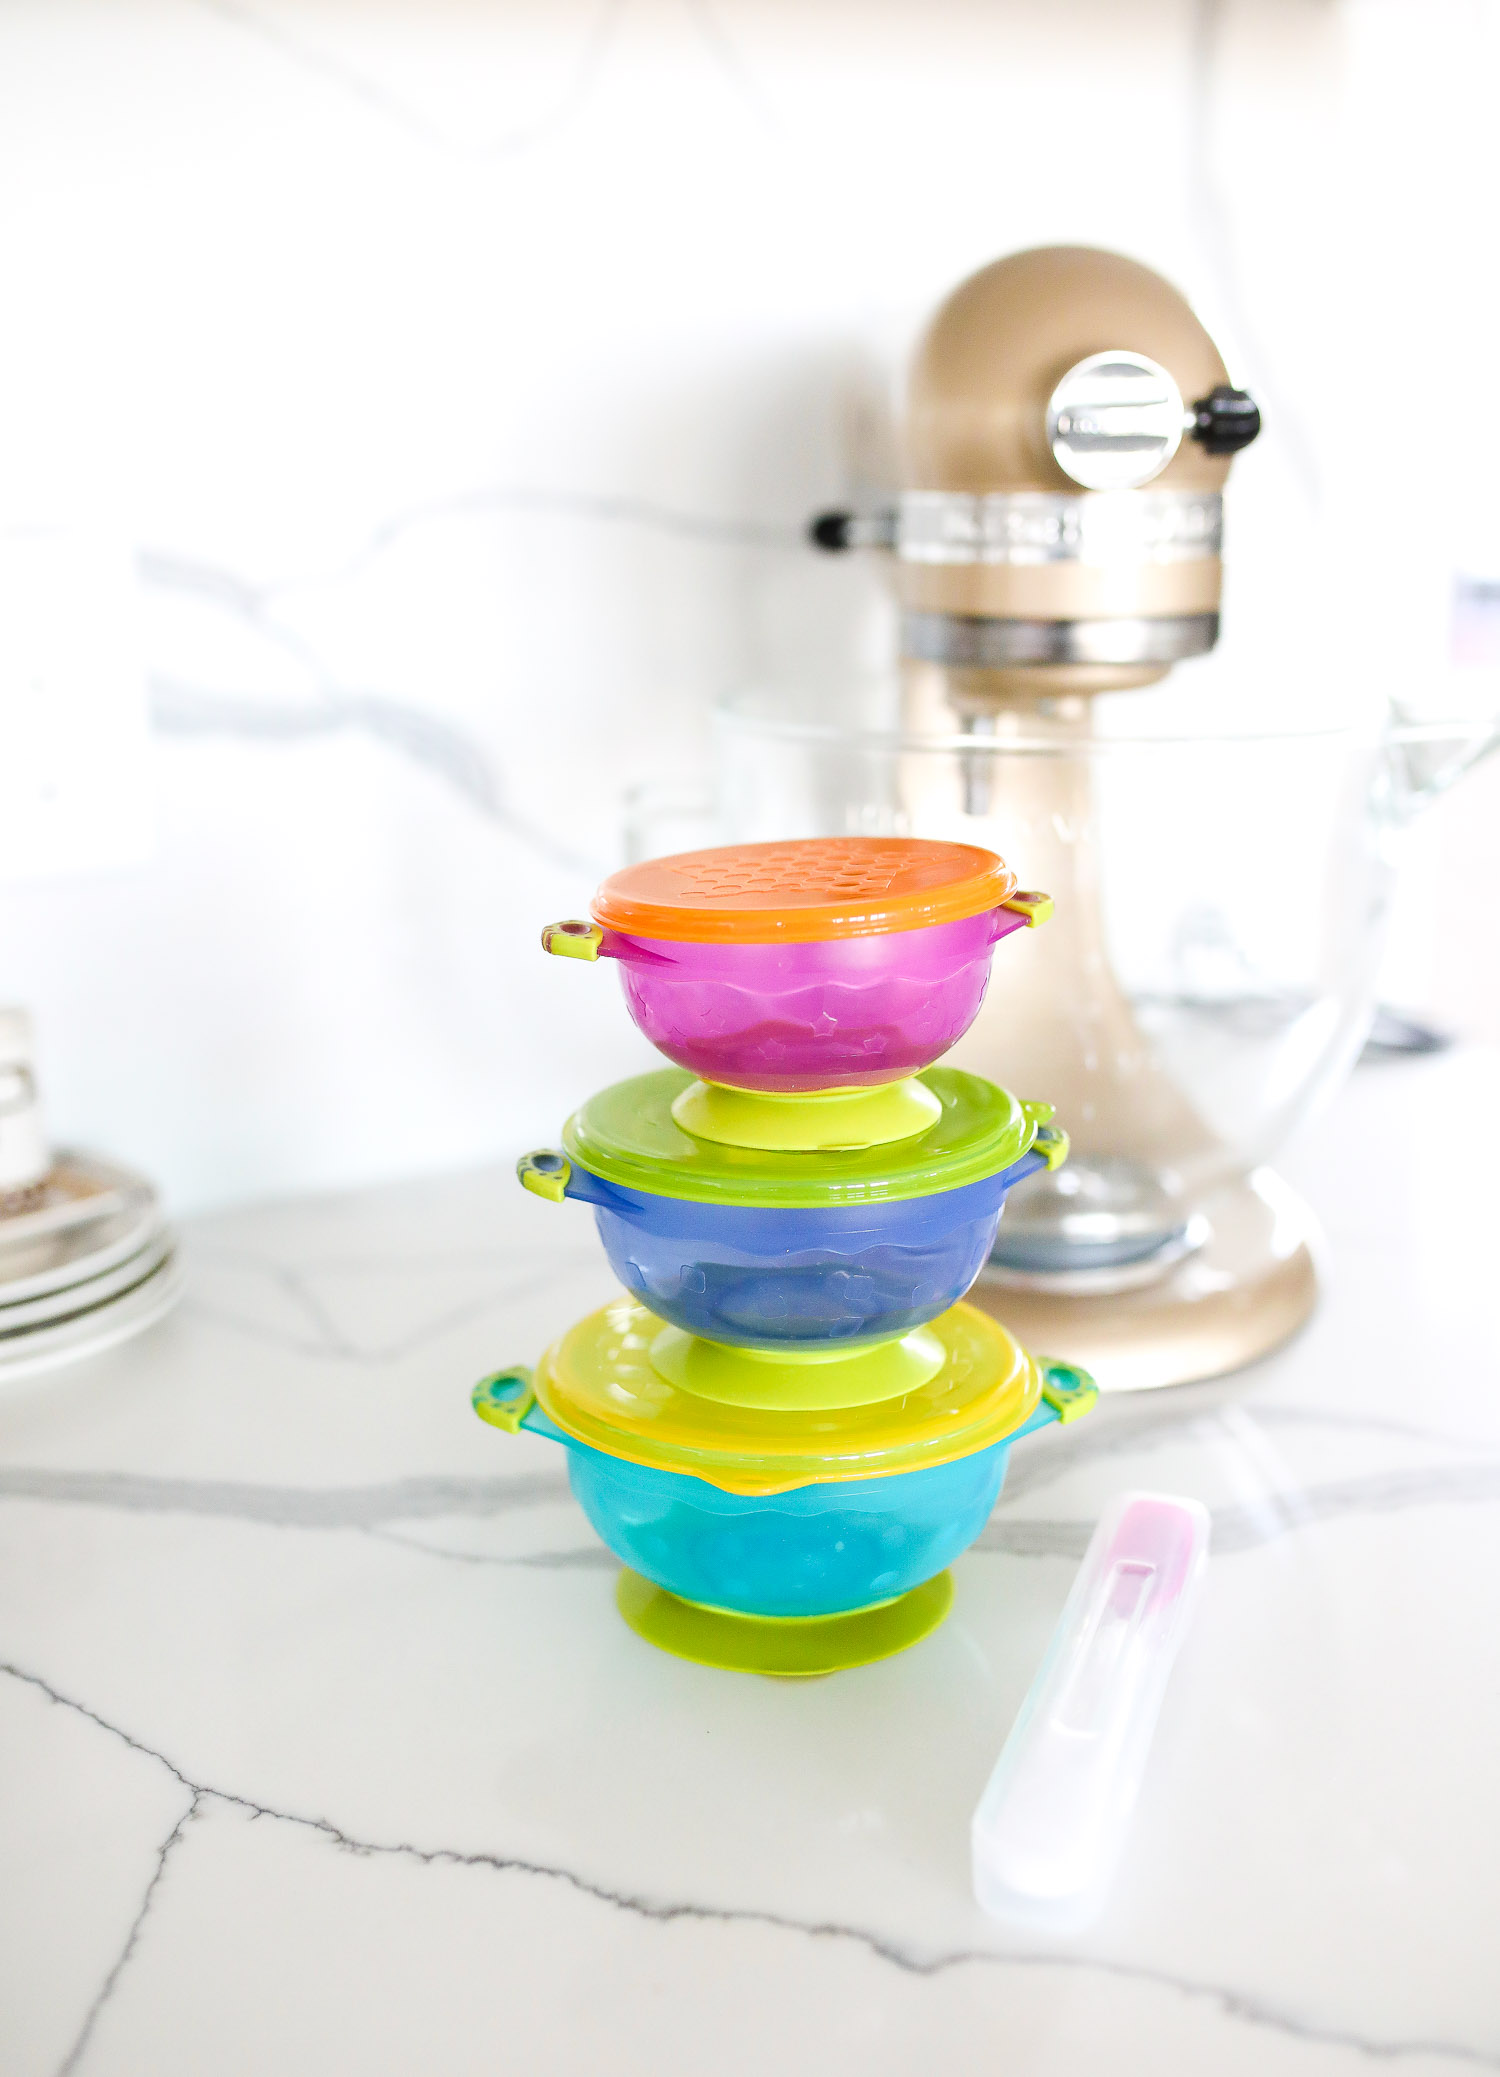 kids travel dishes bowls, top amazon must haves, amazon best buys 2020, emily gemma, amazon prime must haves blog post,_-4 | Amazon Prime Favorites by popular US life and style blog, The Sweetest Thing: image of Amazon Prime kids stackable travel bowls with suction. 